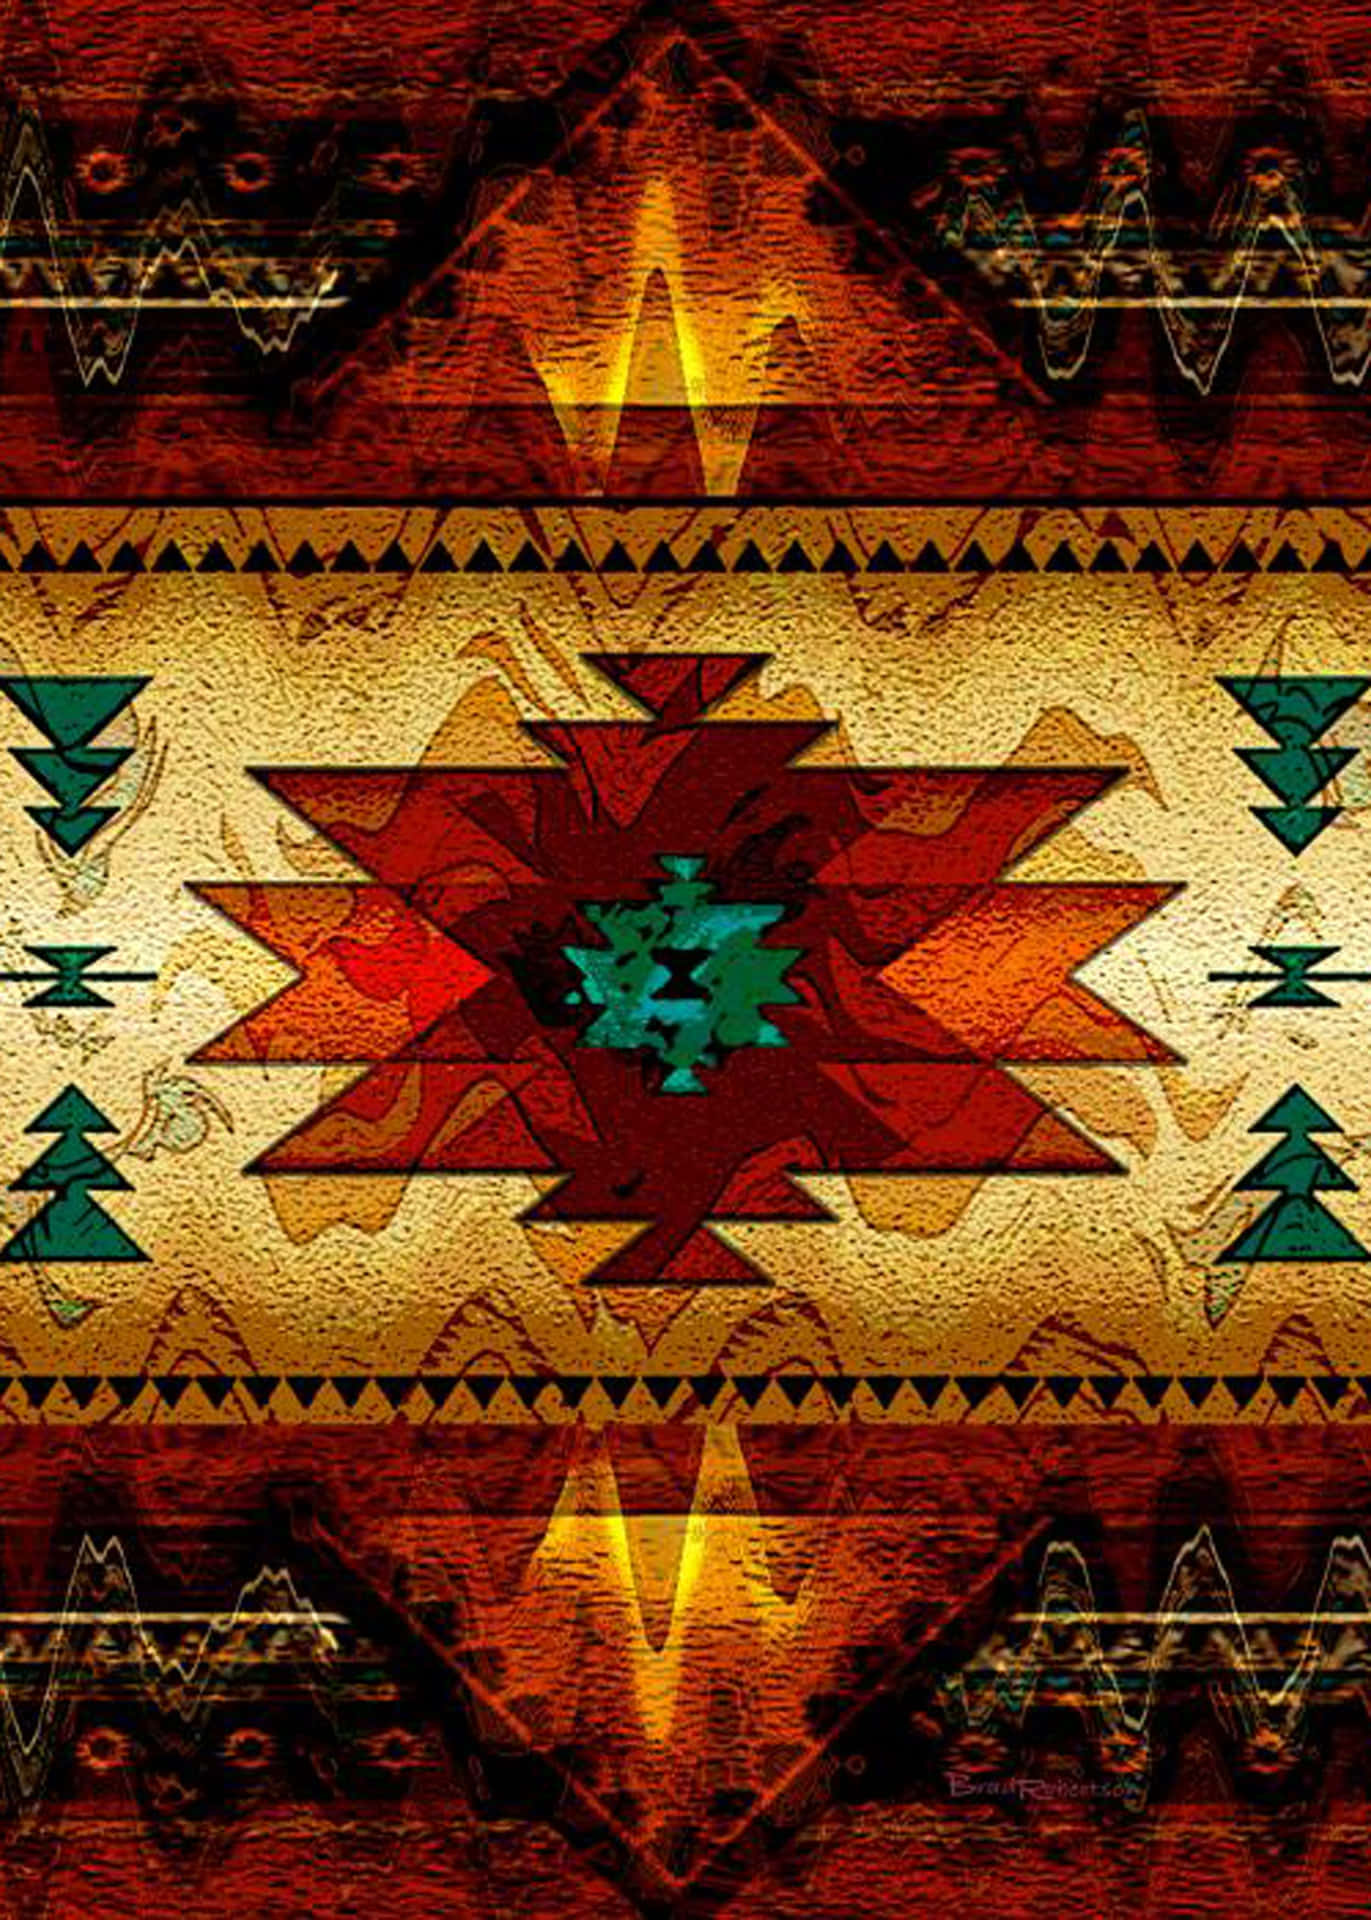 A Southwestern Style Art Print With Red, Yellow And Green Colors Wallpaper